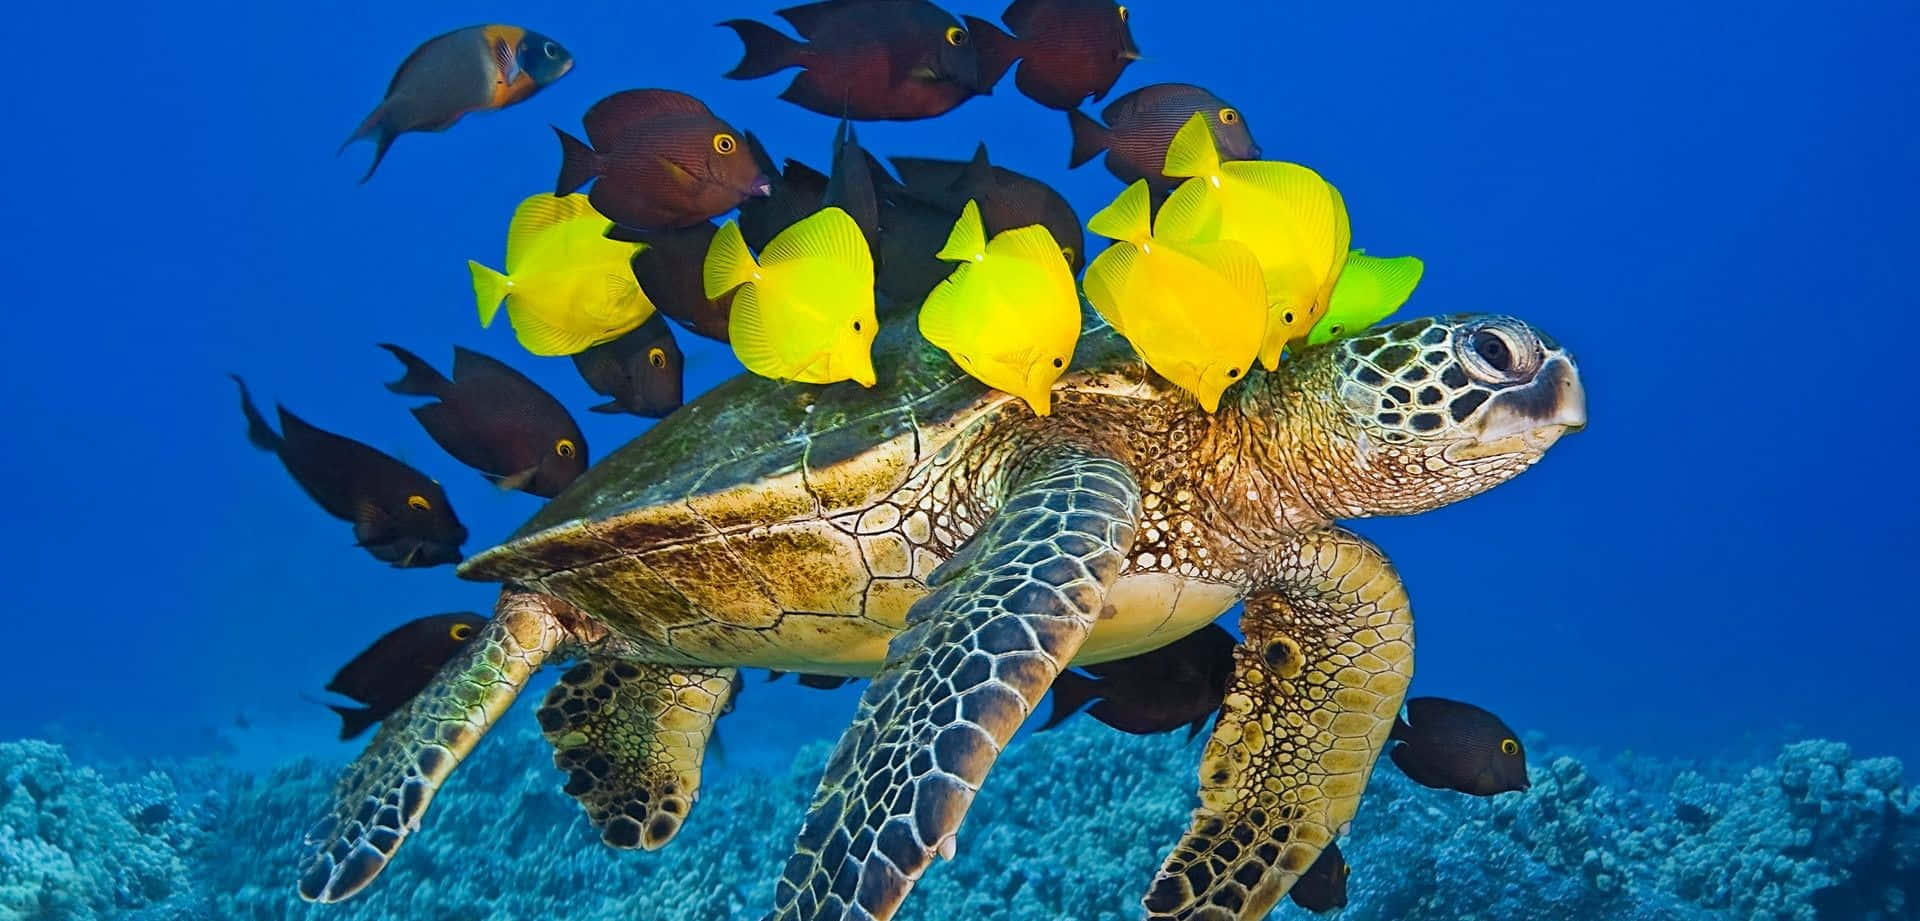 A Turtle With Fish On Its Back